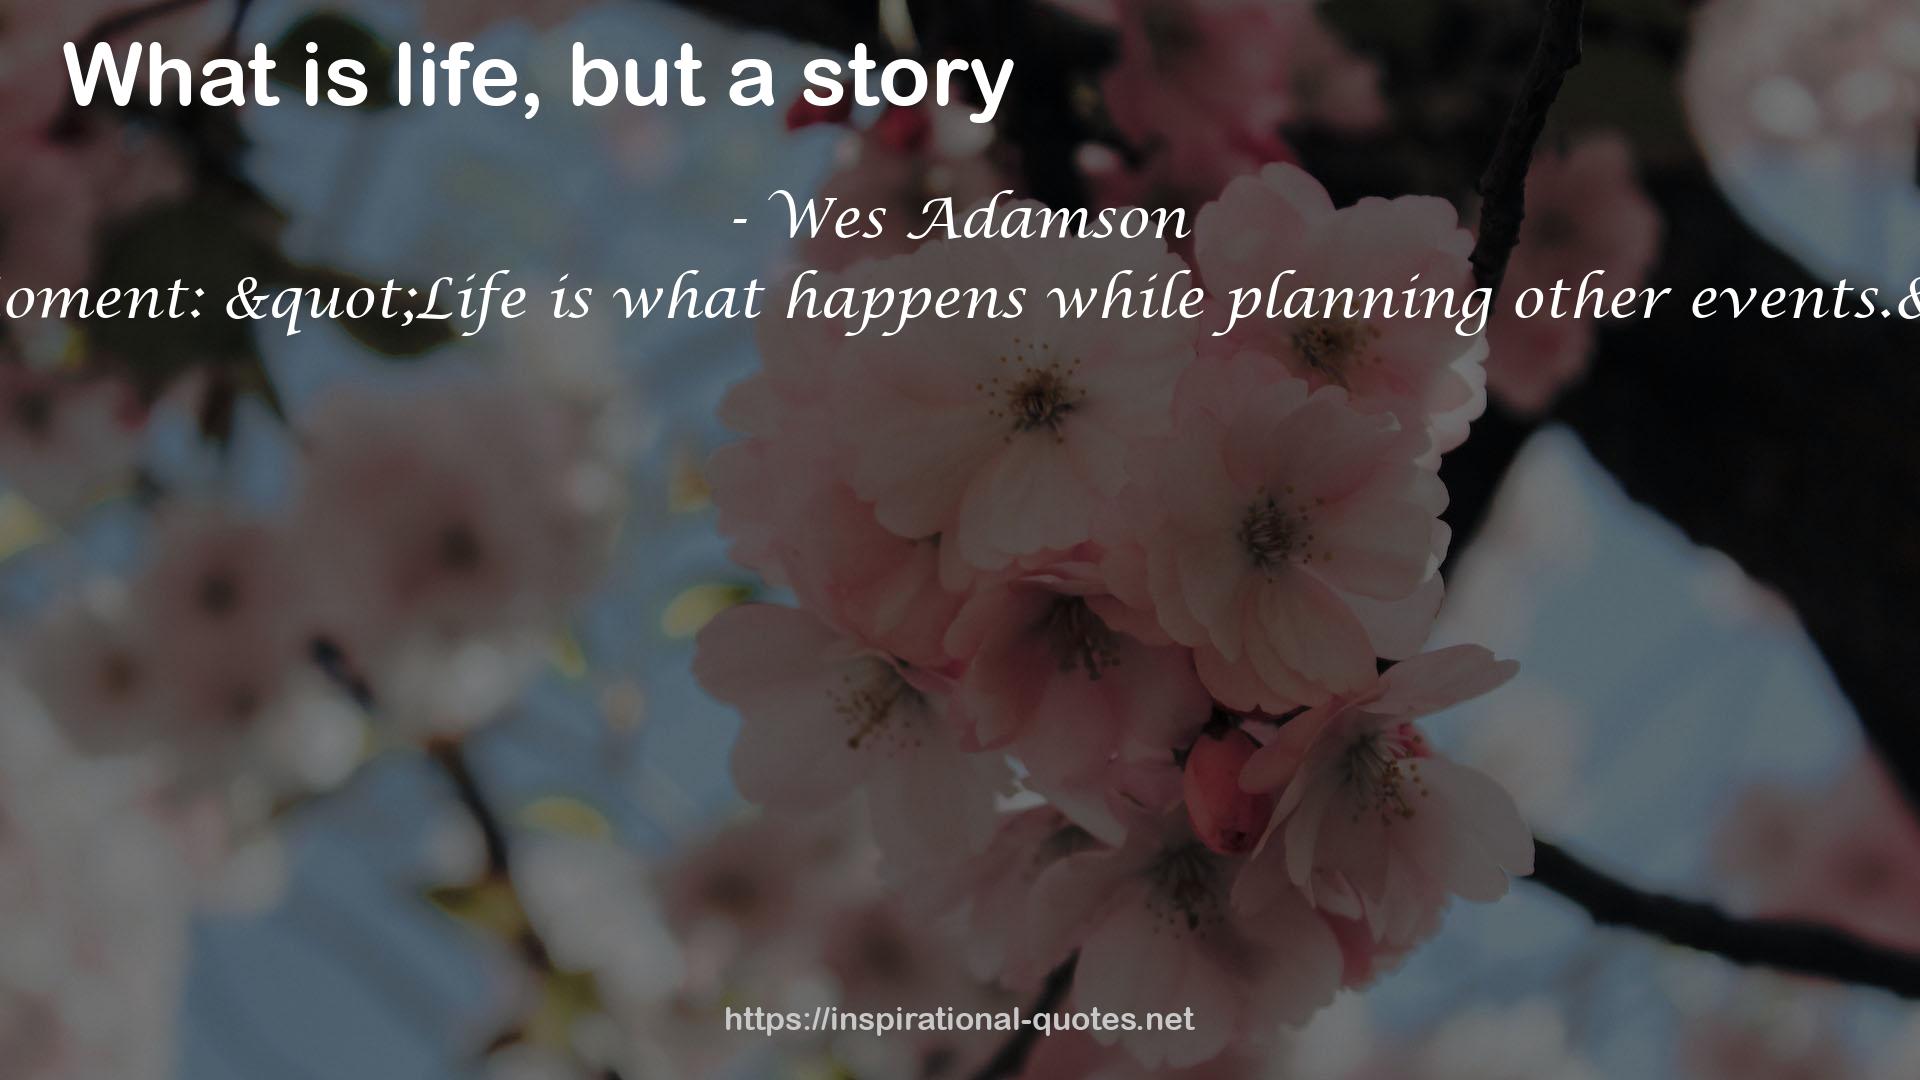 Living Life In The Moment: "Life is what happens while planning other events." ...John Lennon QUOTES